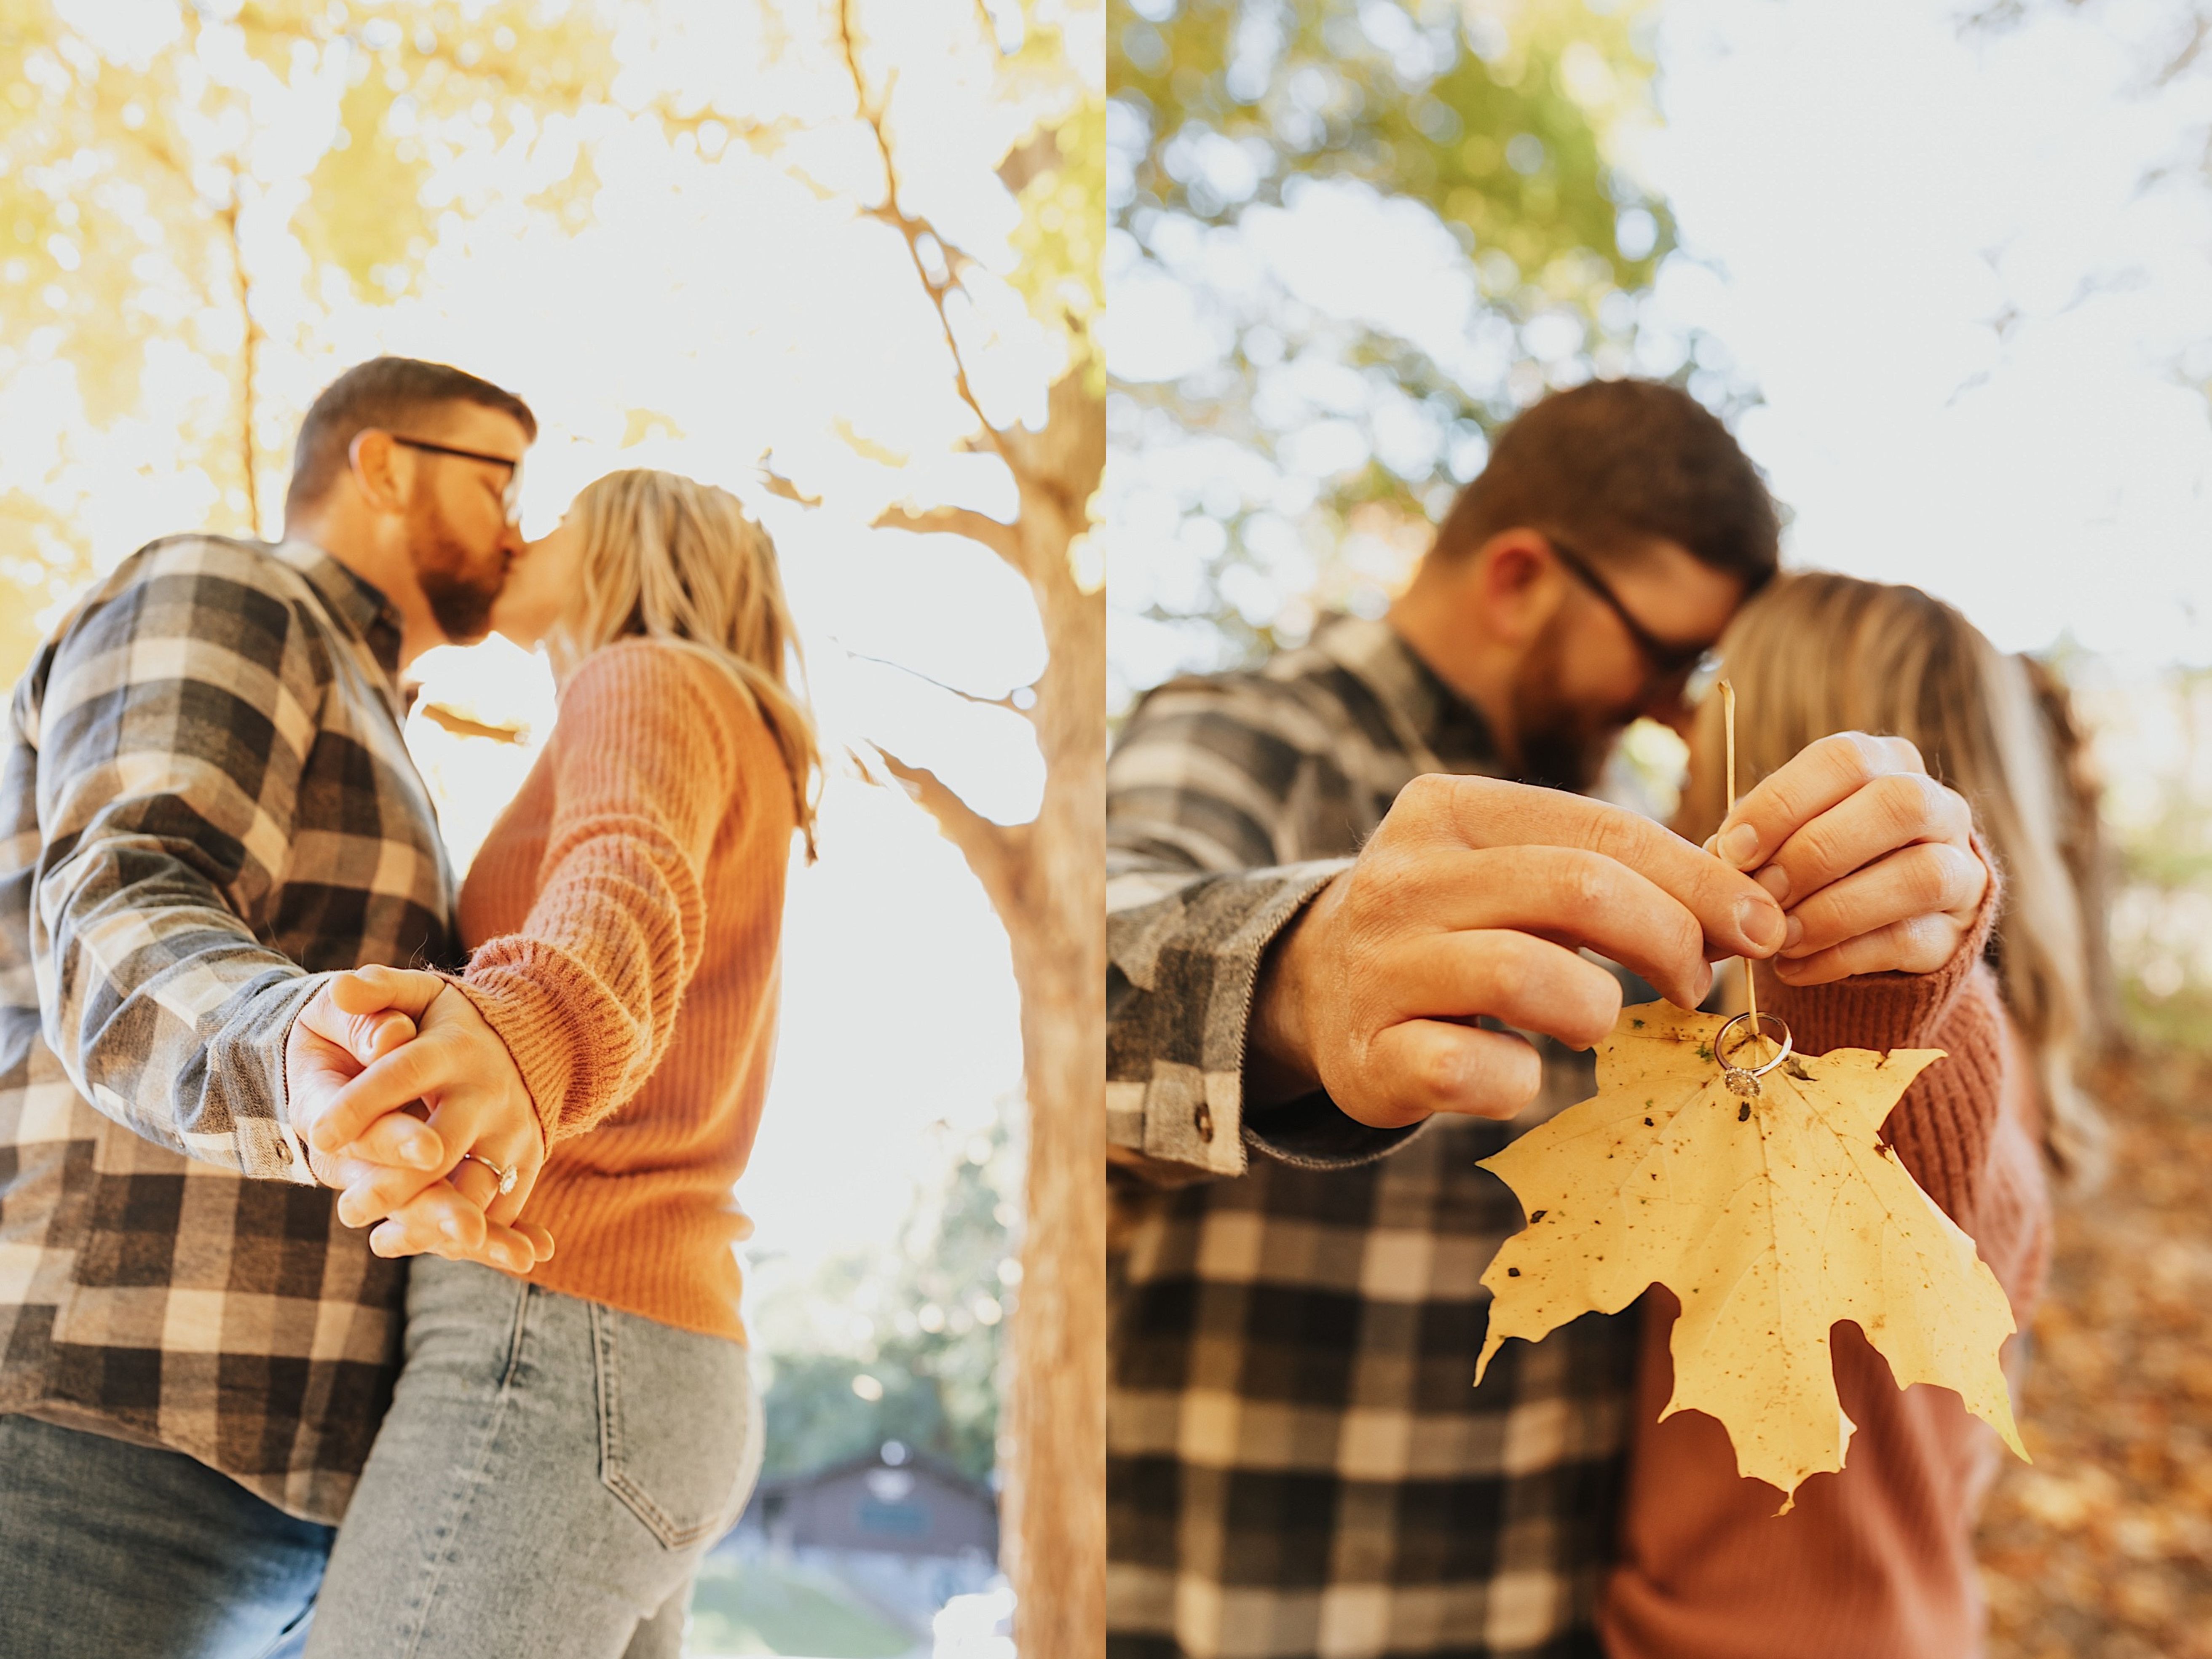 Two photos side by side, the left is of a couple kissing one another while holding hands, their hands are extended down towards the camera with an engagement ring on the woman's hand, the right photo is of that same couple holding a yellow leaf with an engagement ring on the stem as they are about to kiss in the background